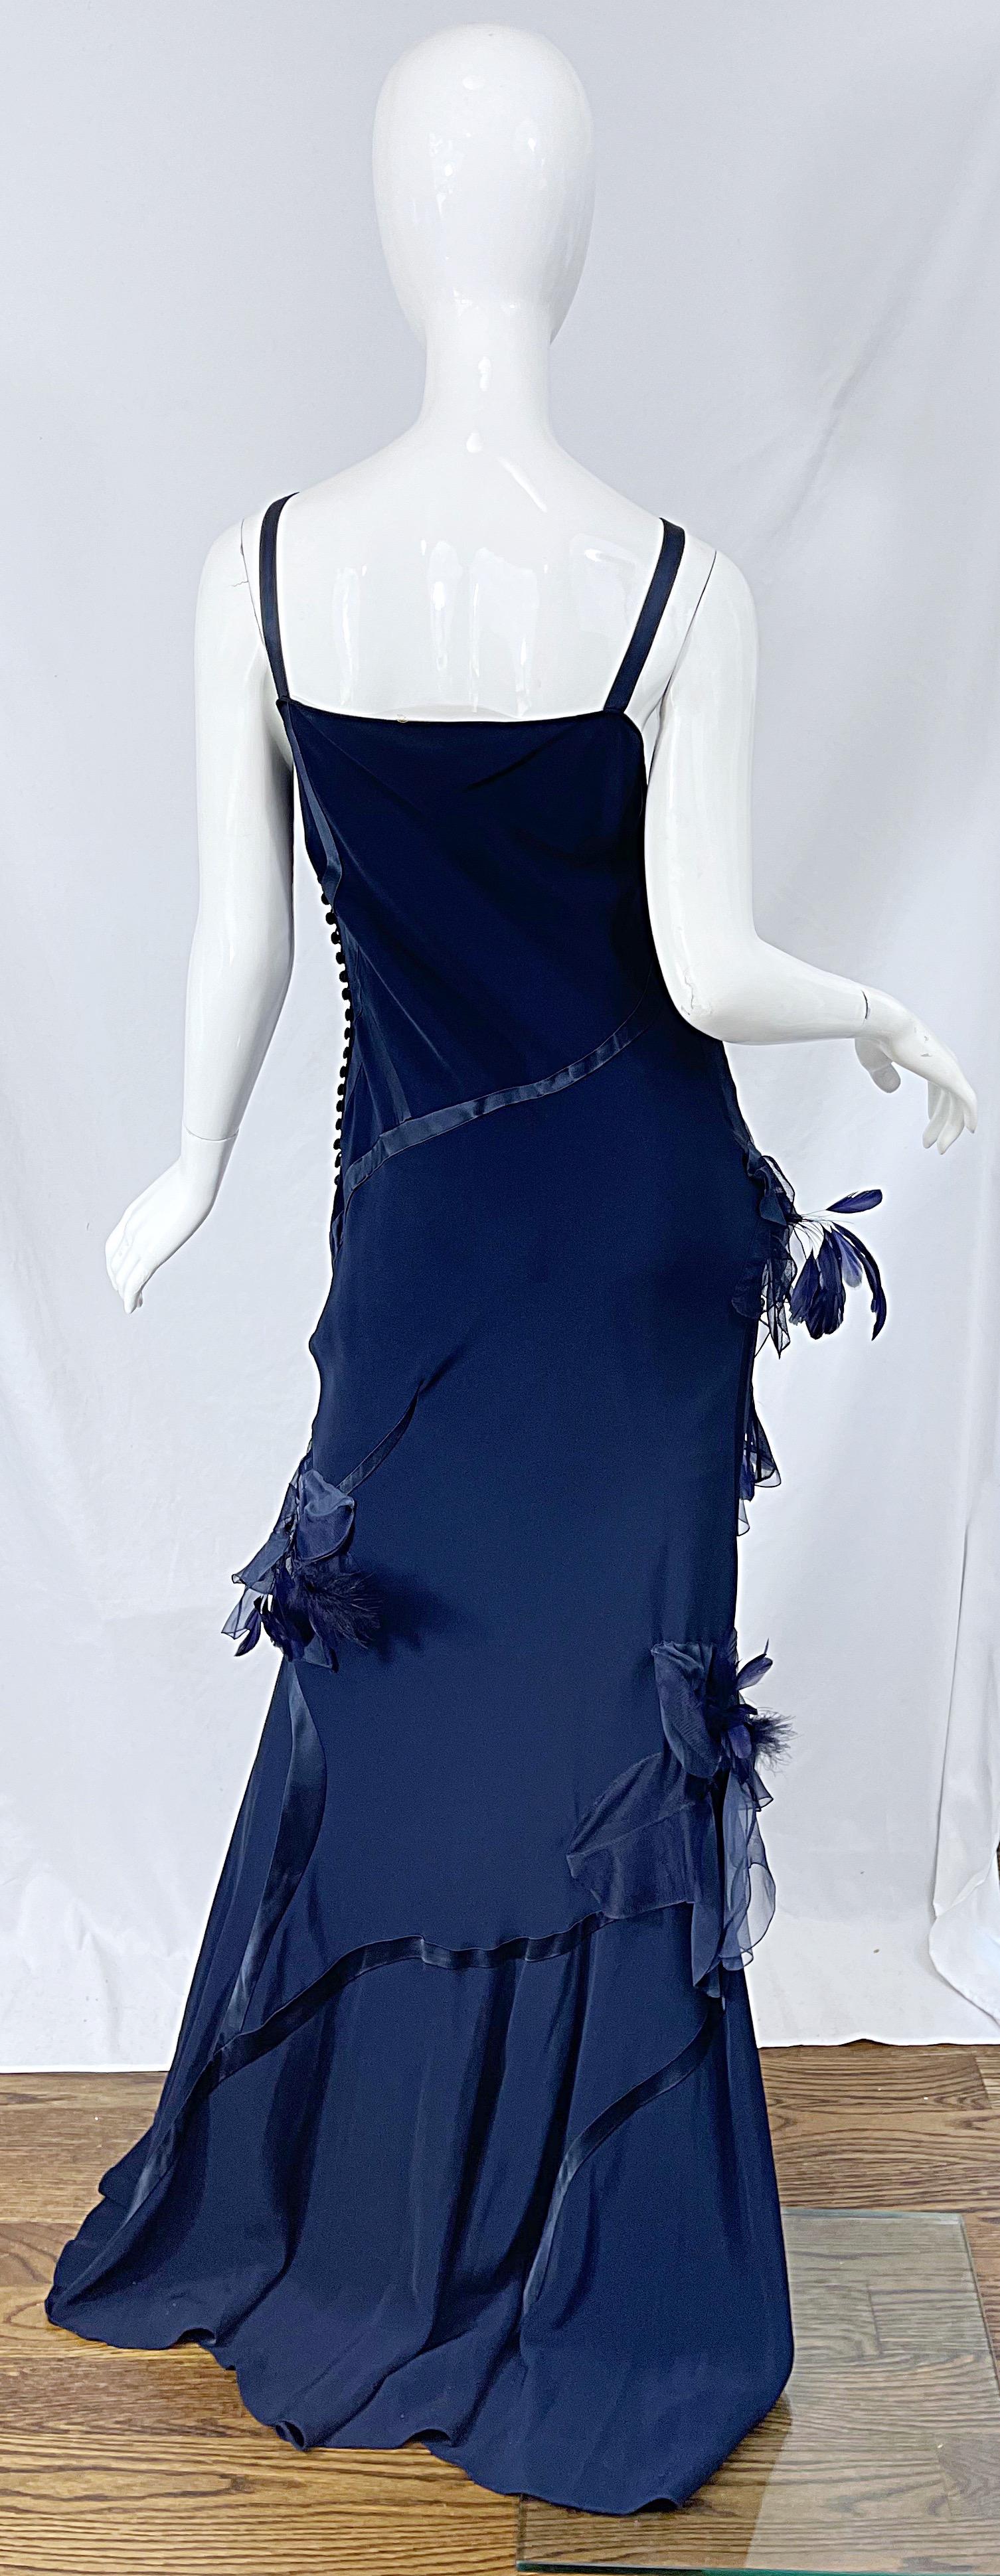 NWT John Galliano Size 10 Early 2000s Navy Blue Feather Silk / Satin Gown Dress 8